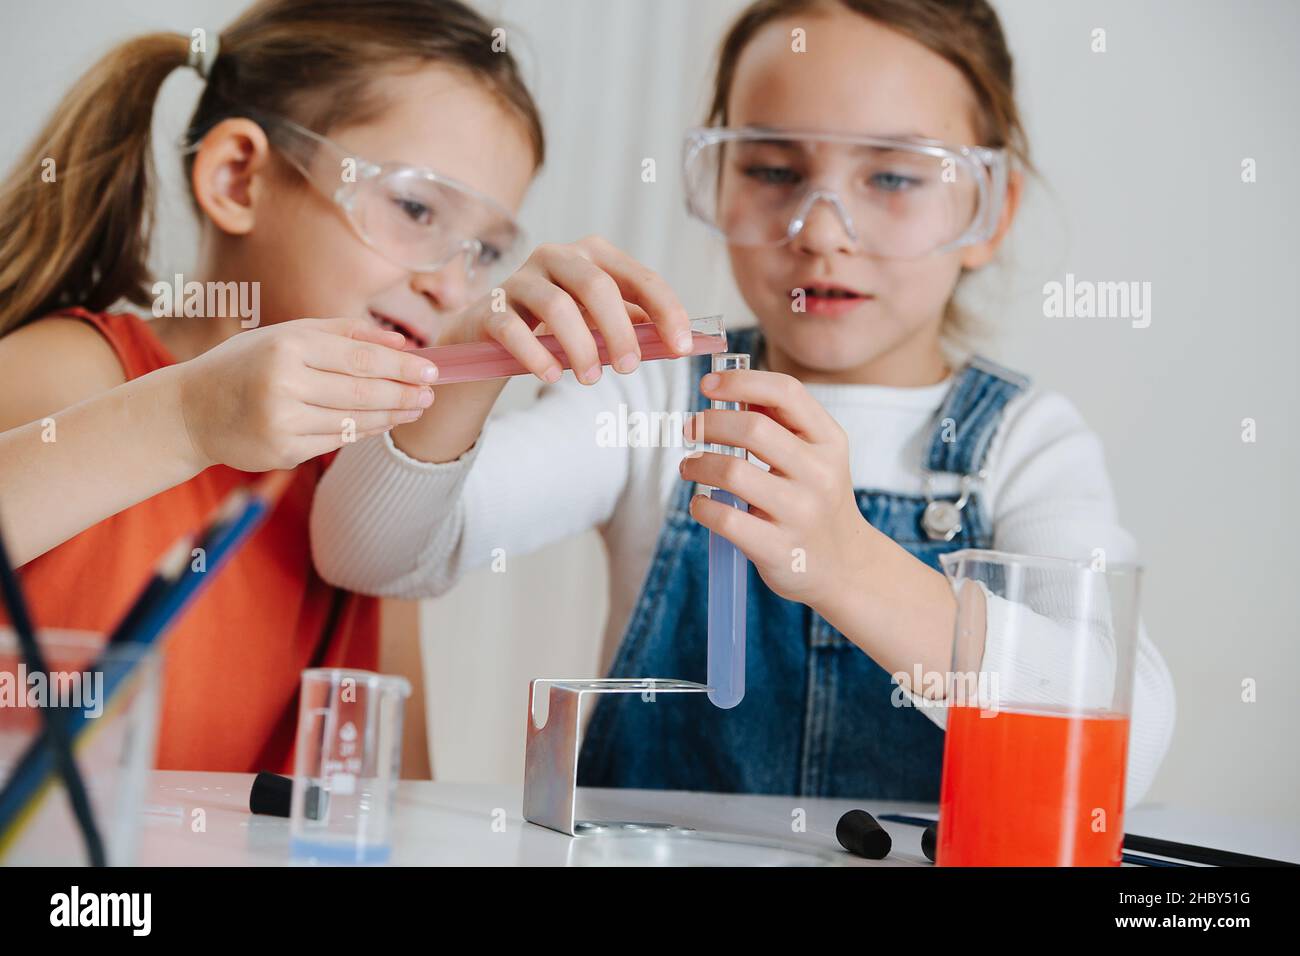 Happy little girls doing science project, they are mixing two colored liquids Stock Photo